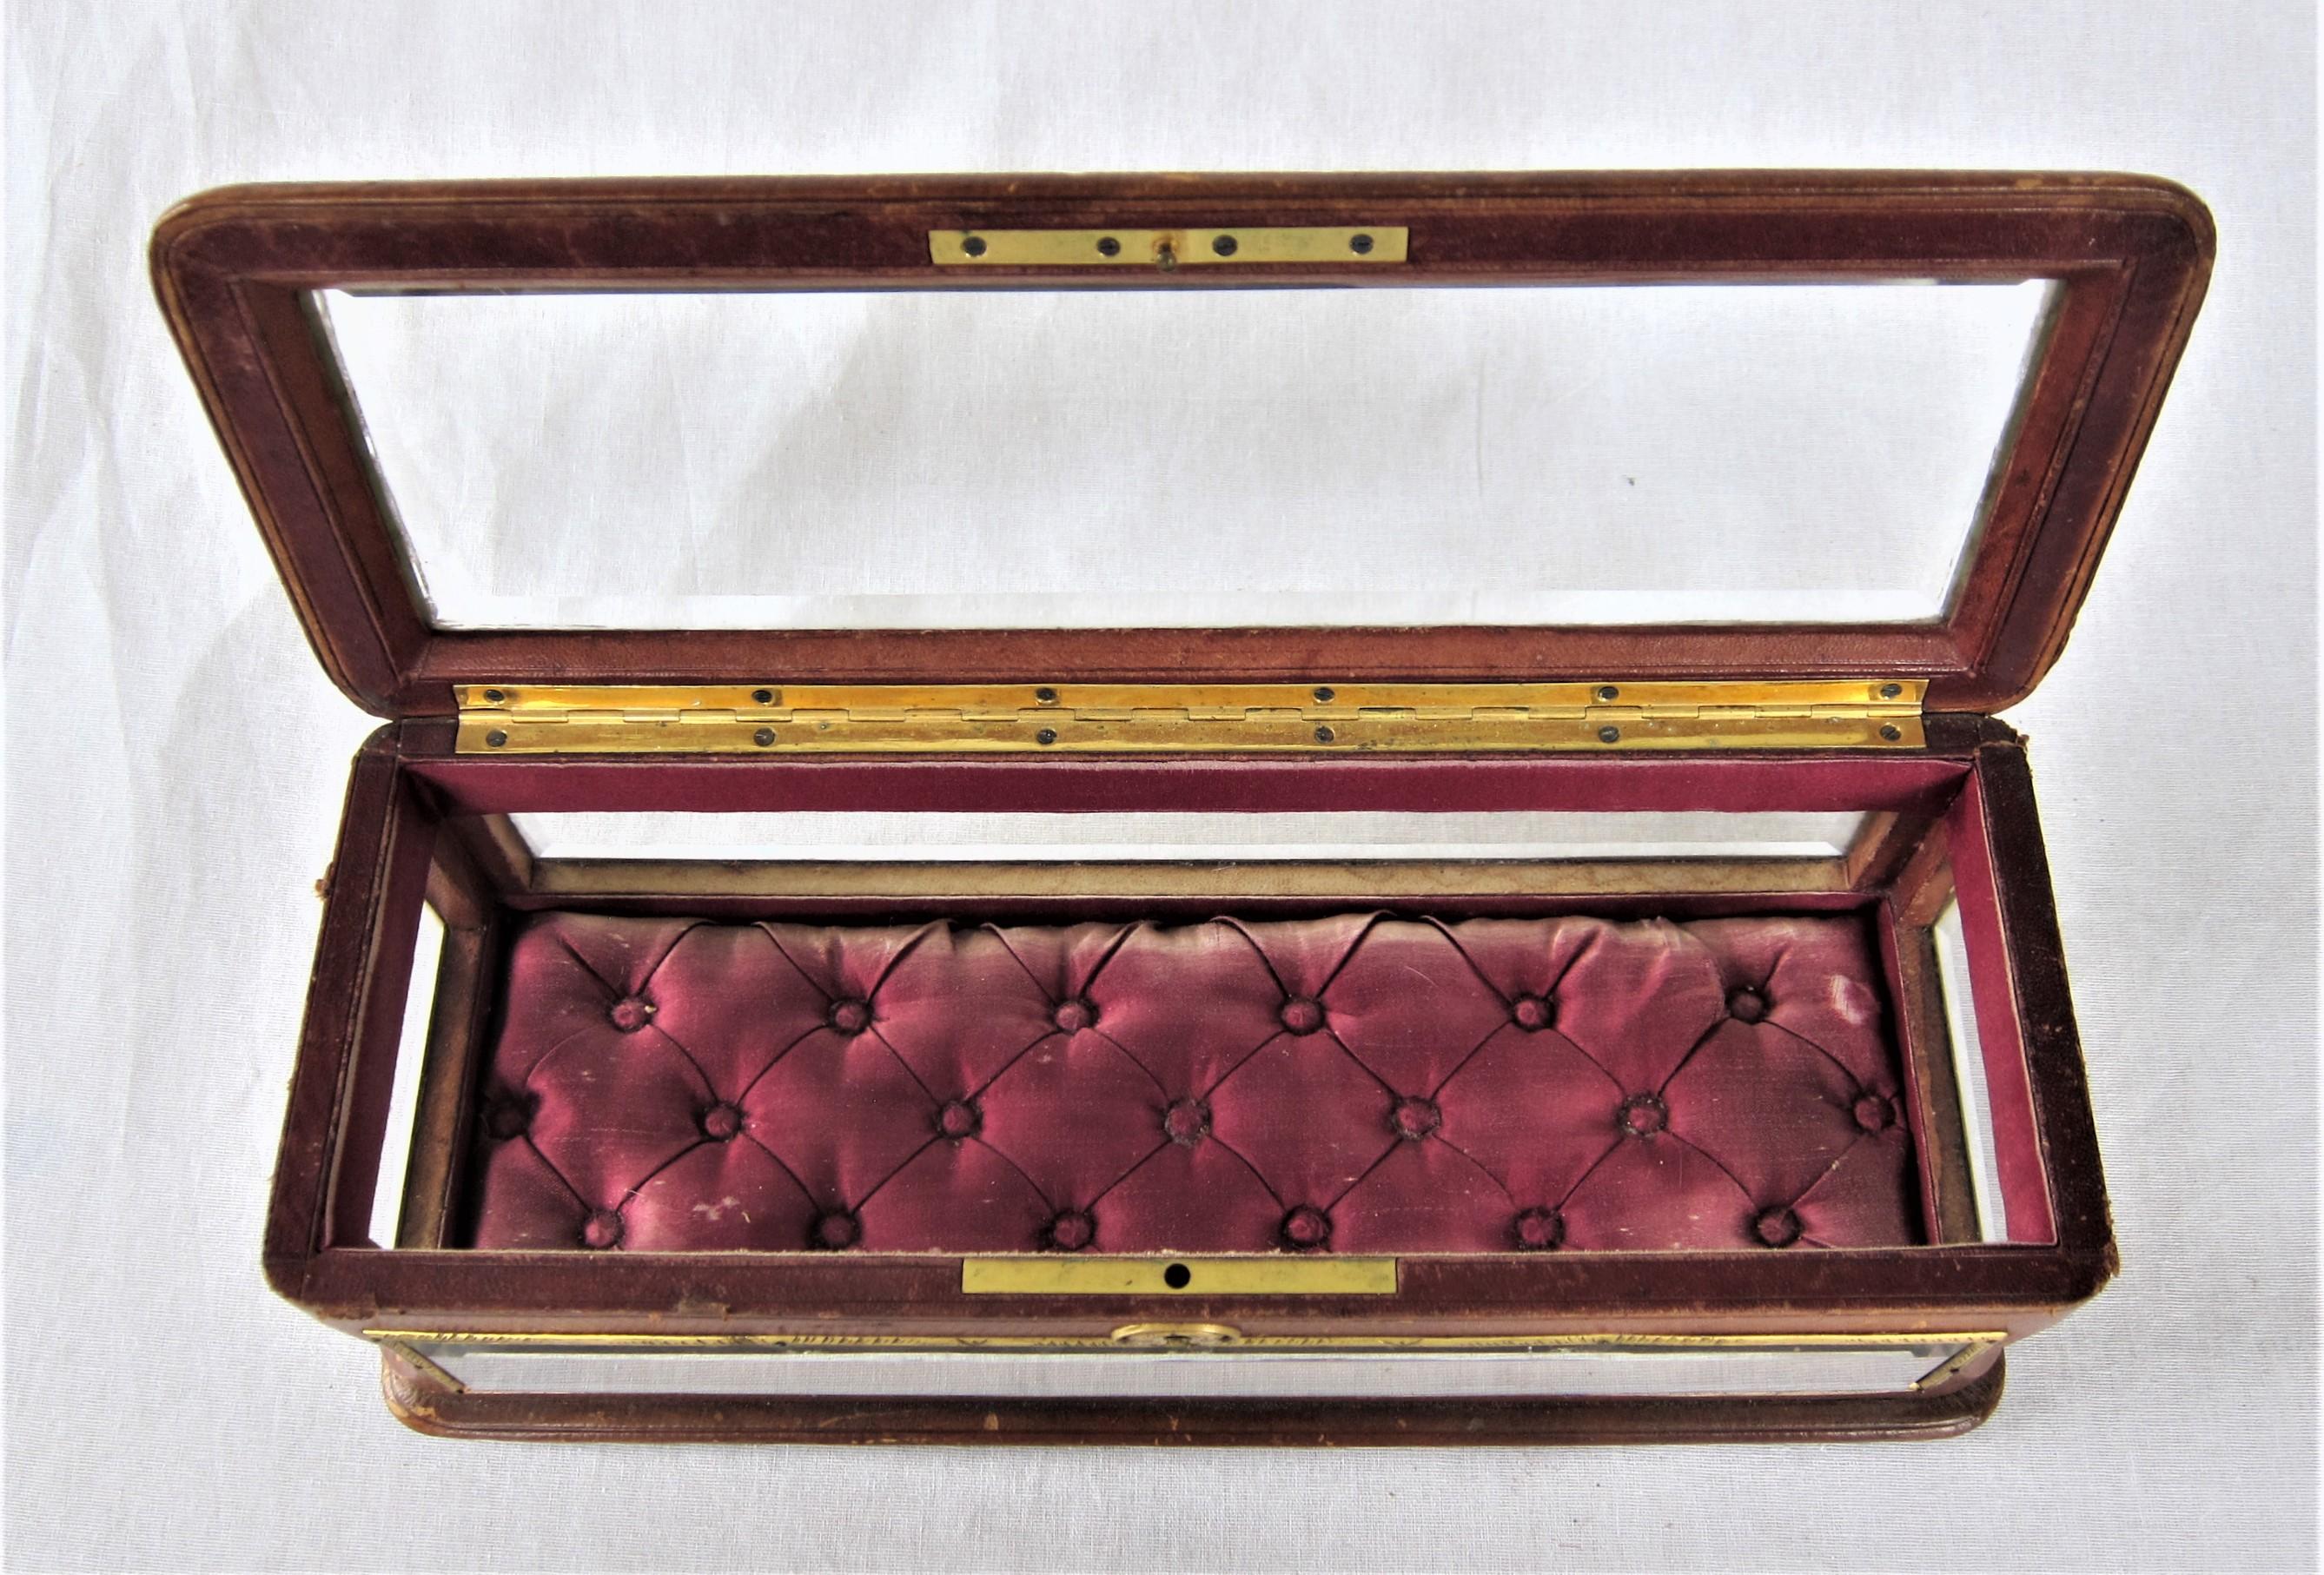 19th century French beveled glass and leather jewelry box, mounted with brass ornaments and keyhole. Upholstered with red silk inside.
Mark on the bottom: Horlogerie et Bijouterie, Eugene Allegre, Rue de Alger, Toulon.
 